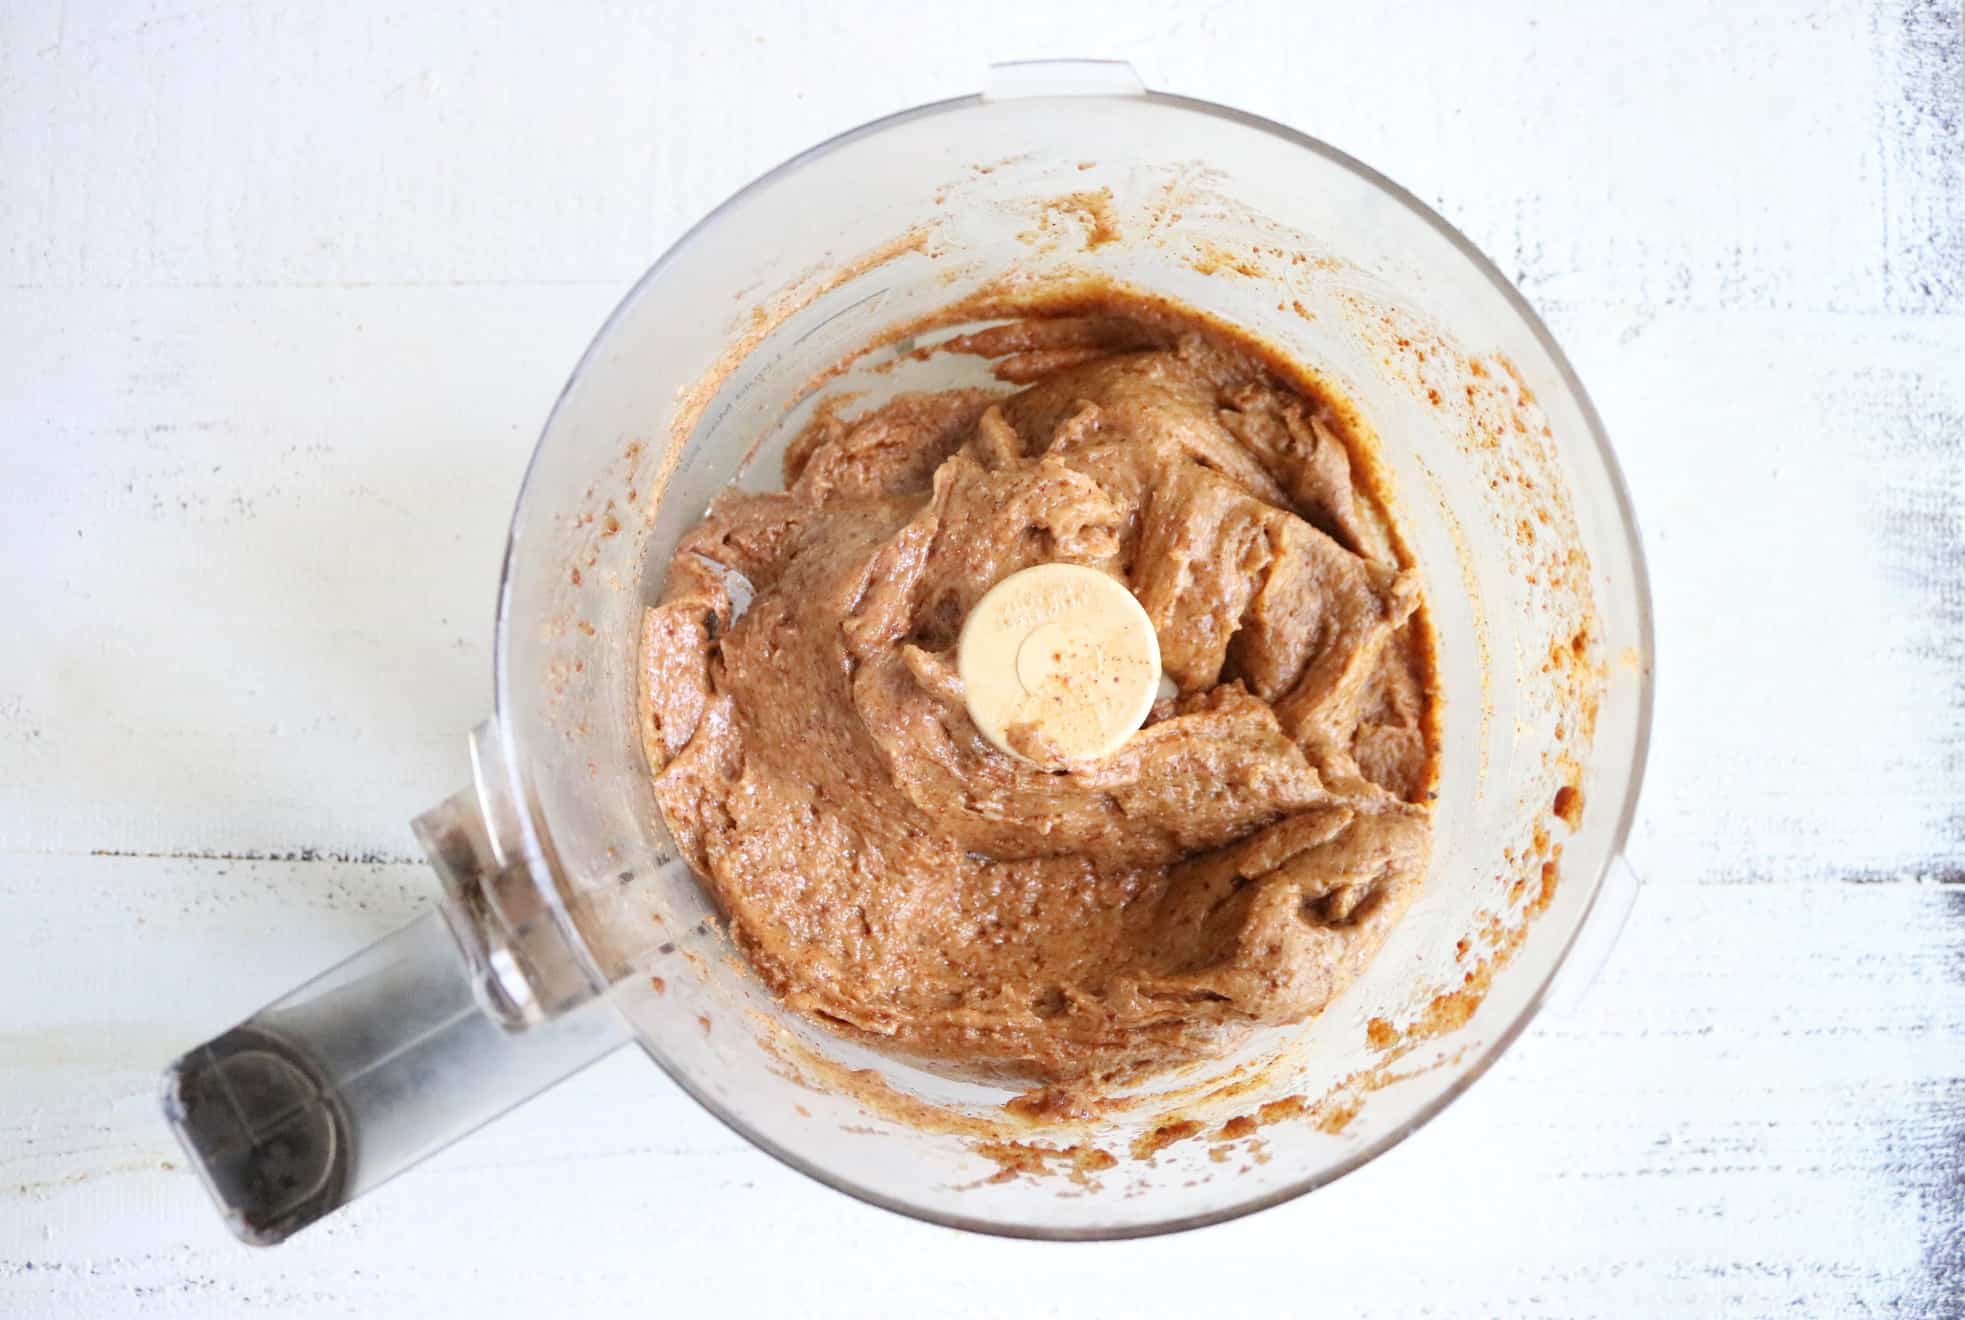 This is an overhead image of a food processor with an almond butter mixture in it. The food processor sits on a white surface.